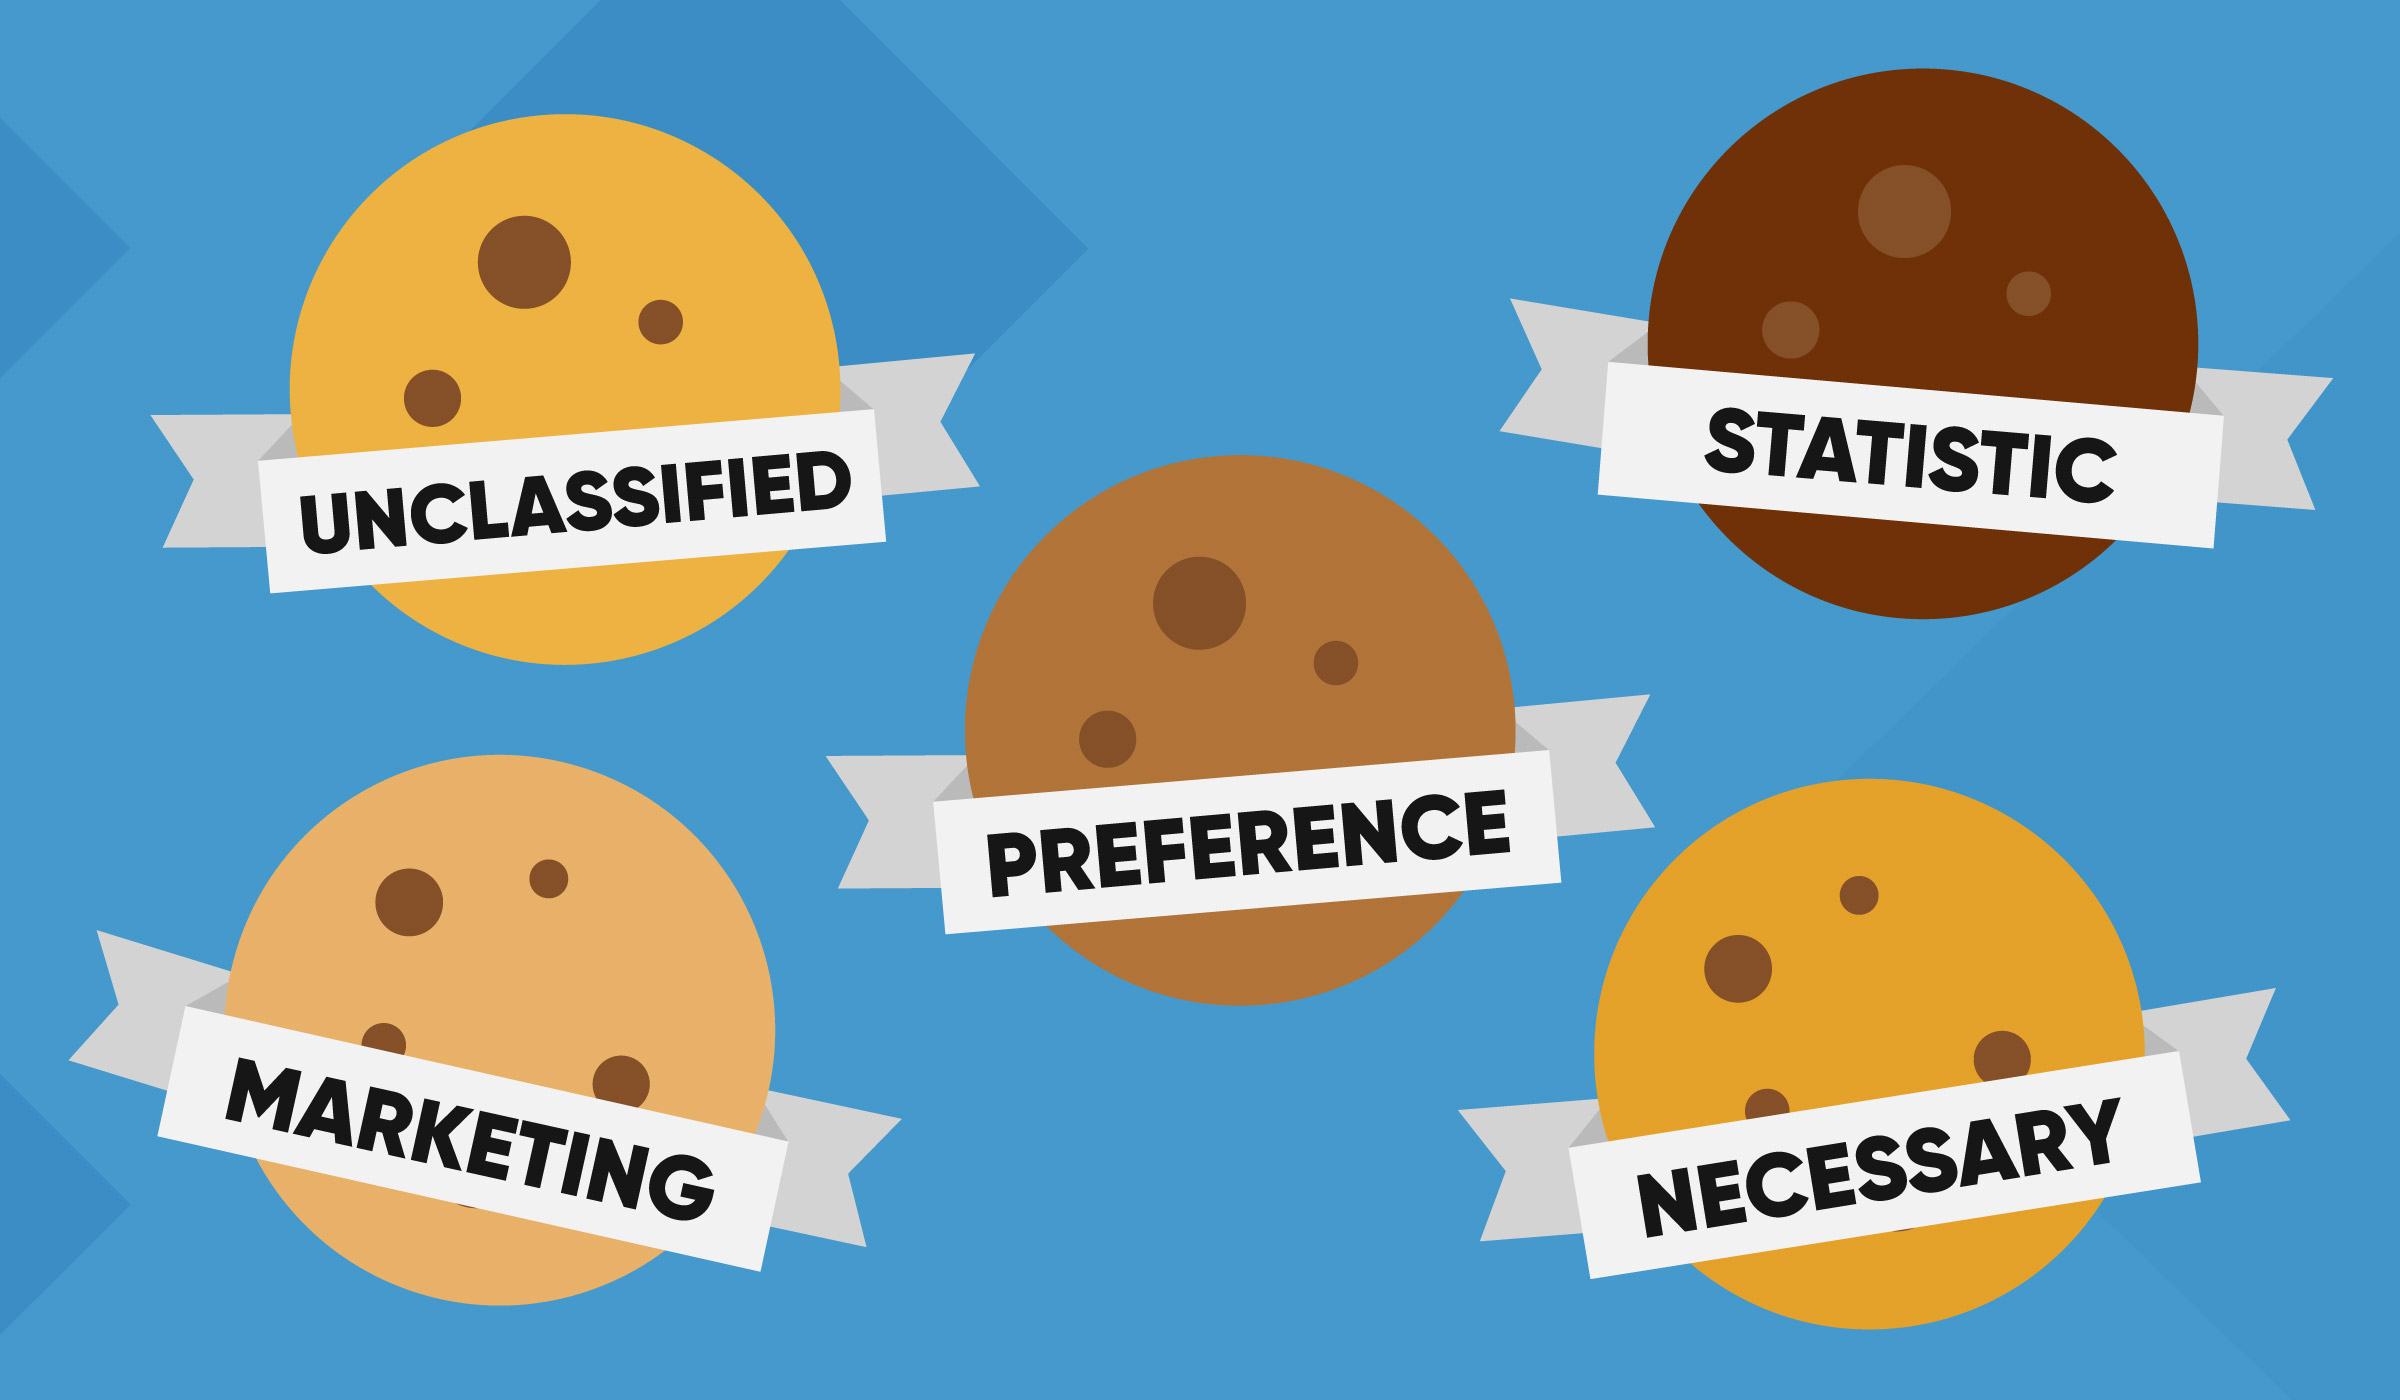 What information needs to be provided about cookies?